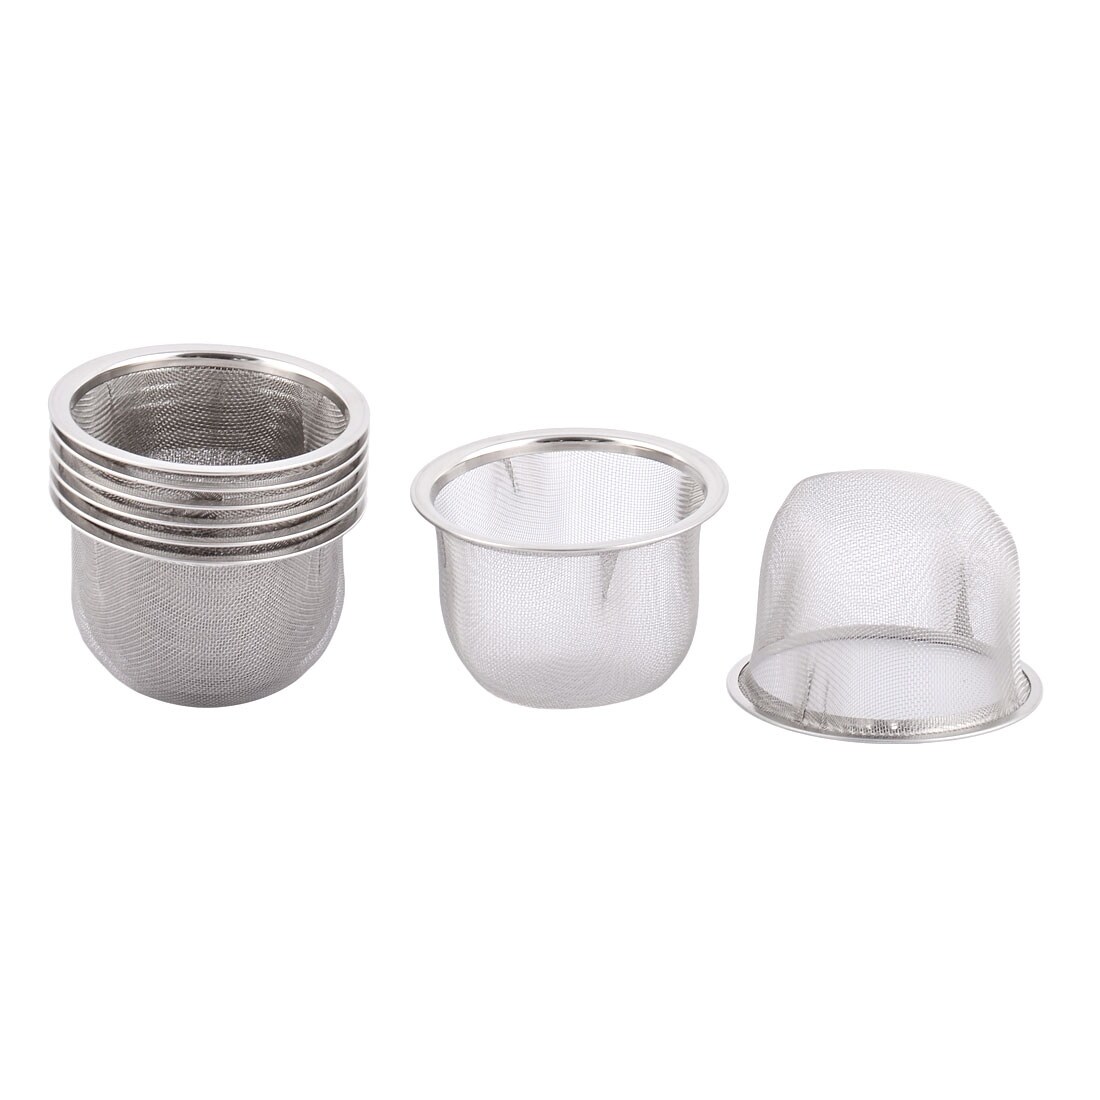 https://ak1.ostkcdn.com/images/products/is/images/direct/3e95caa86c82d4cef61eaf50bcd57ba449321479/Stainless-Steel-Round-Mesh-Tea-Leaf-Spice-Teapot-Filter-Strainer-70mm-Dia-8pcs.jpg